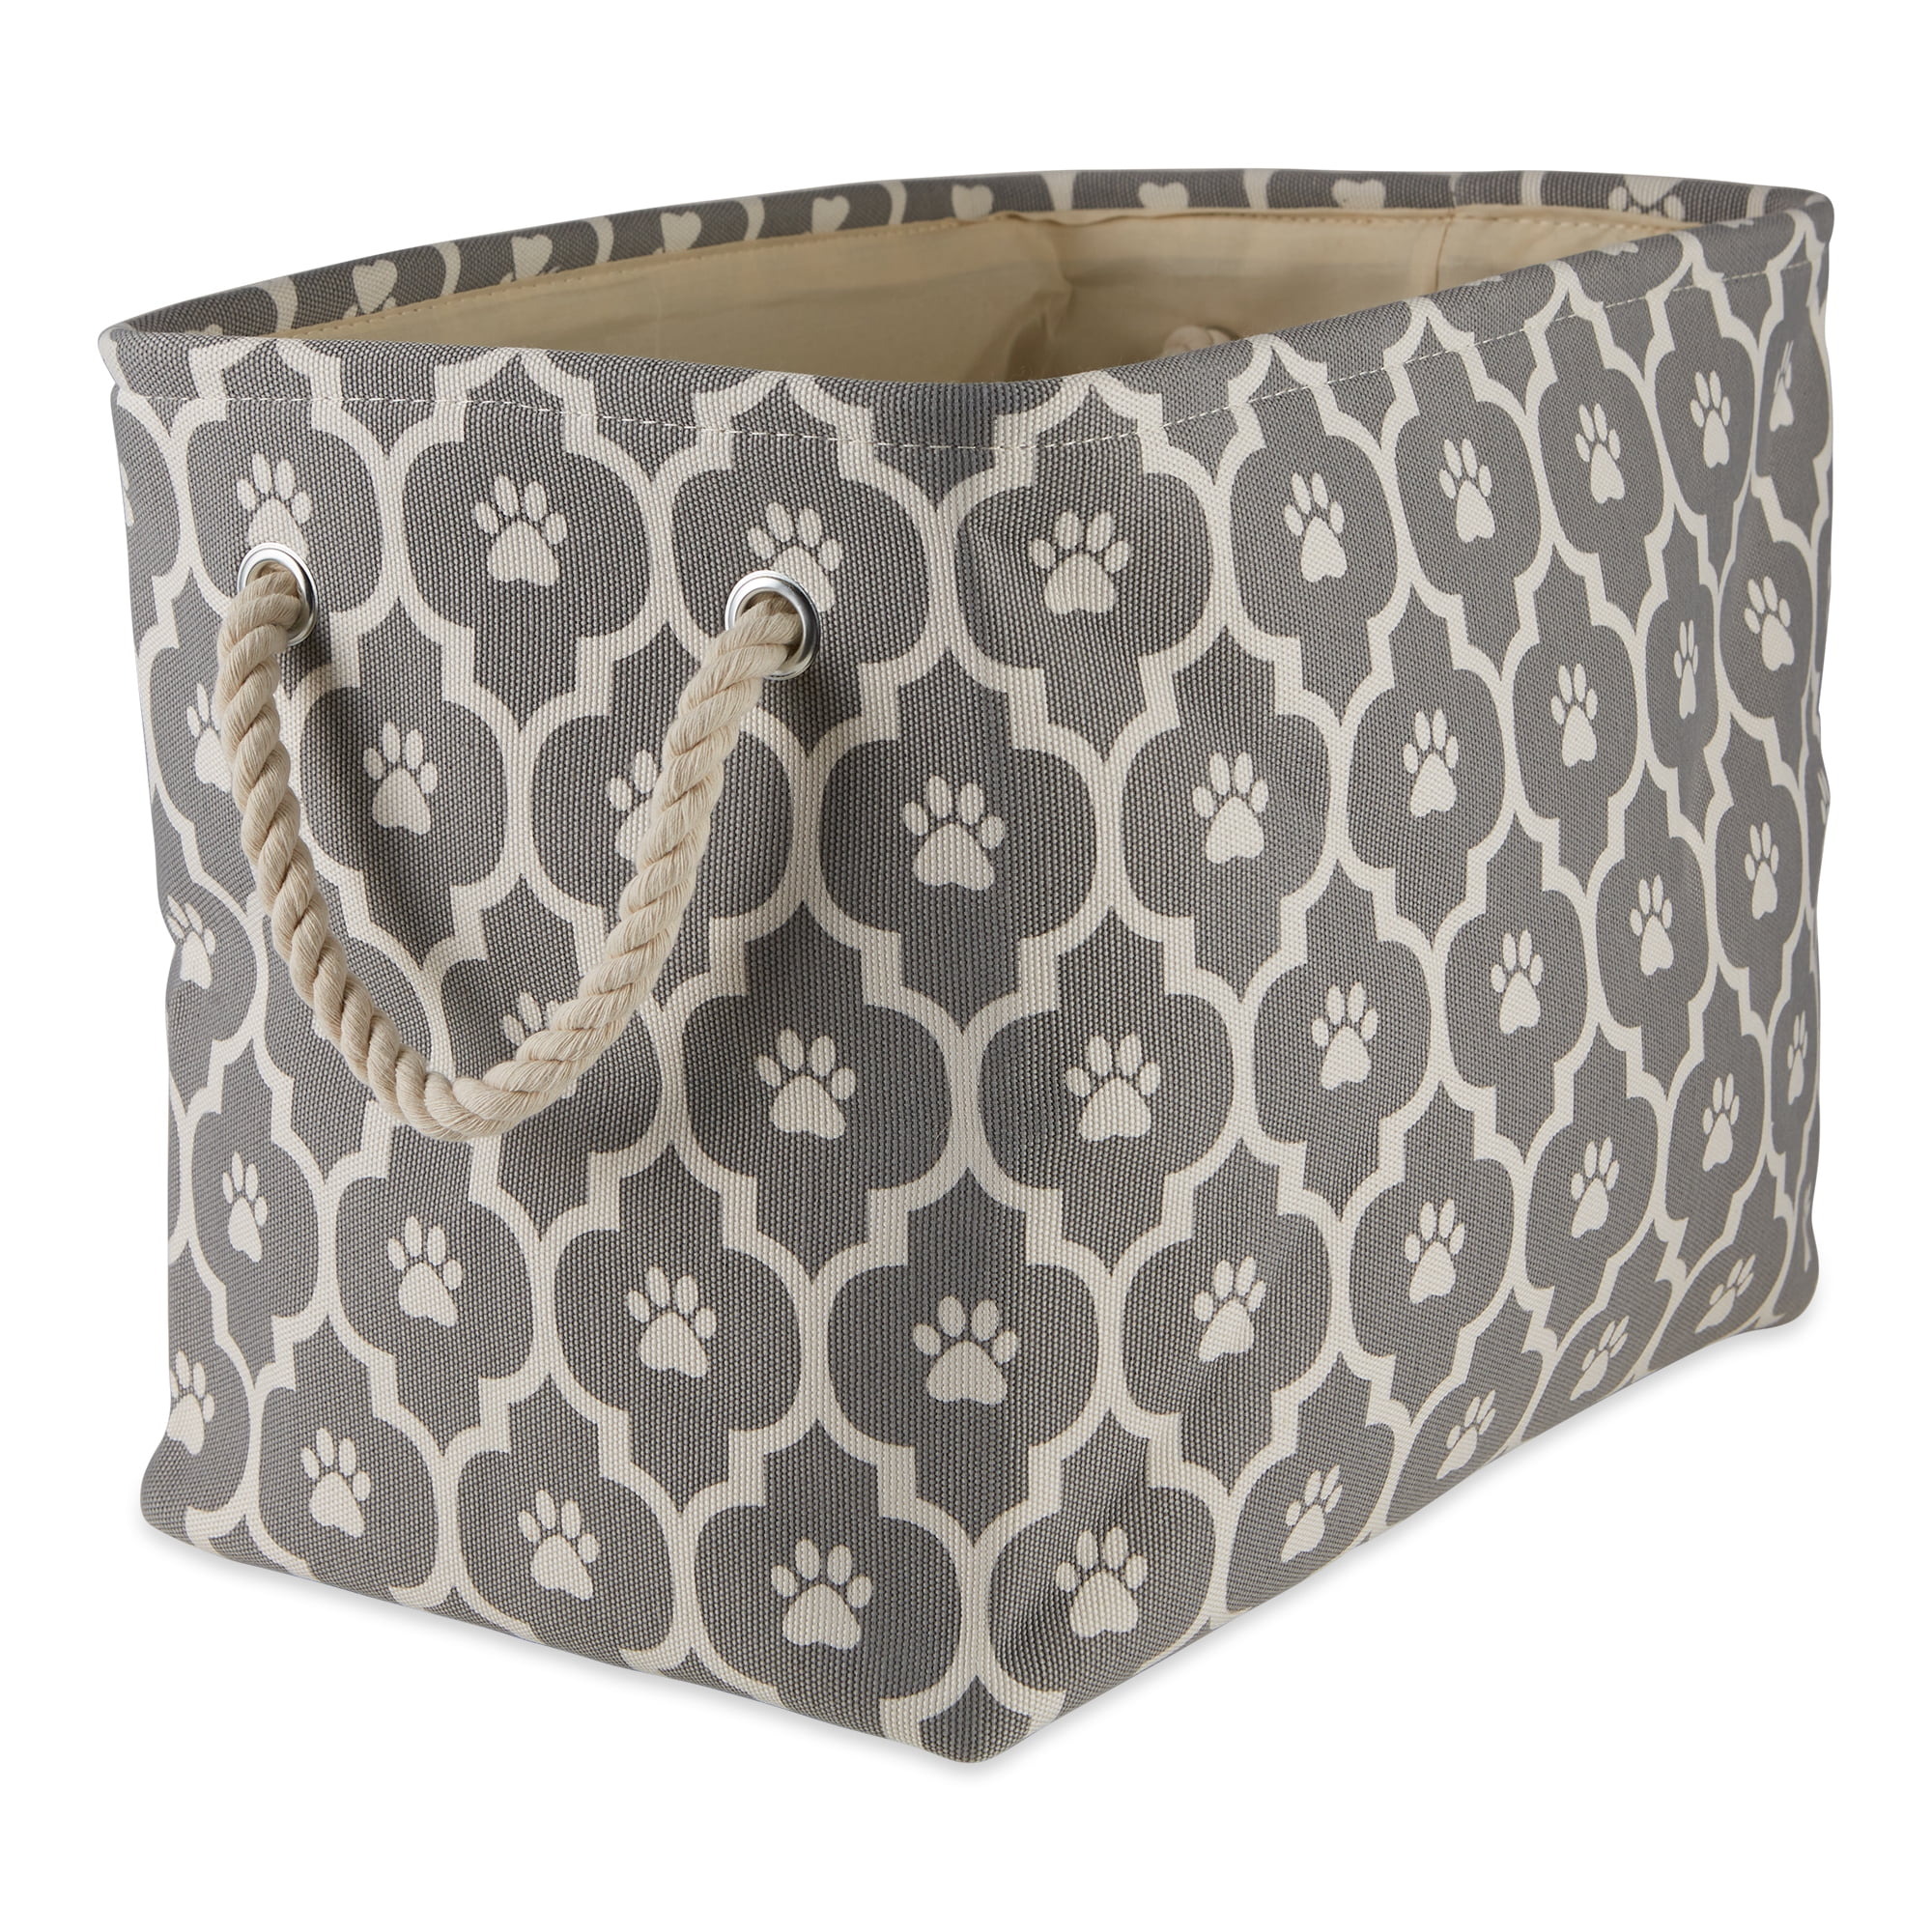 Picture of Design Imports CAMZ12515 Lattice Paw Rectangle Polyester Pet Bin, Gray - Small